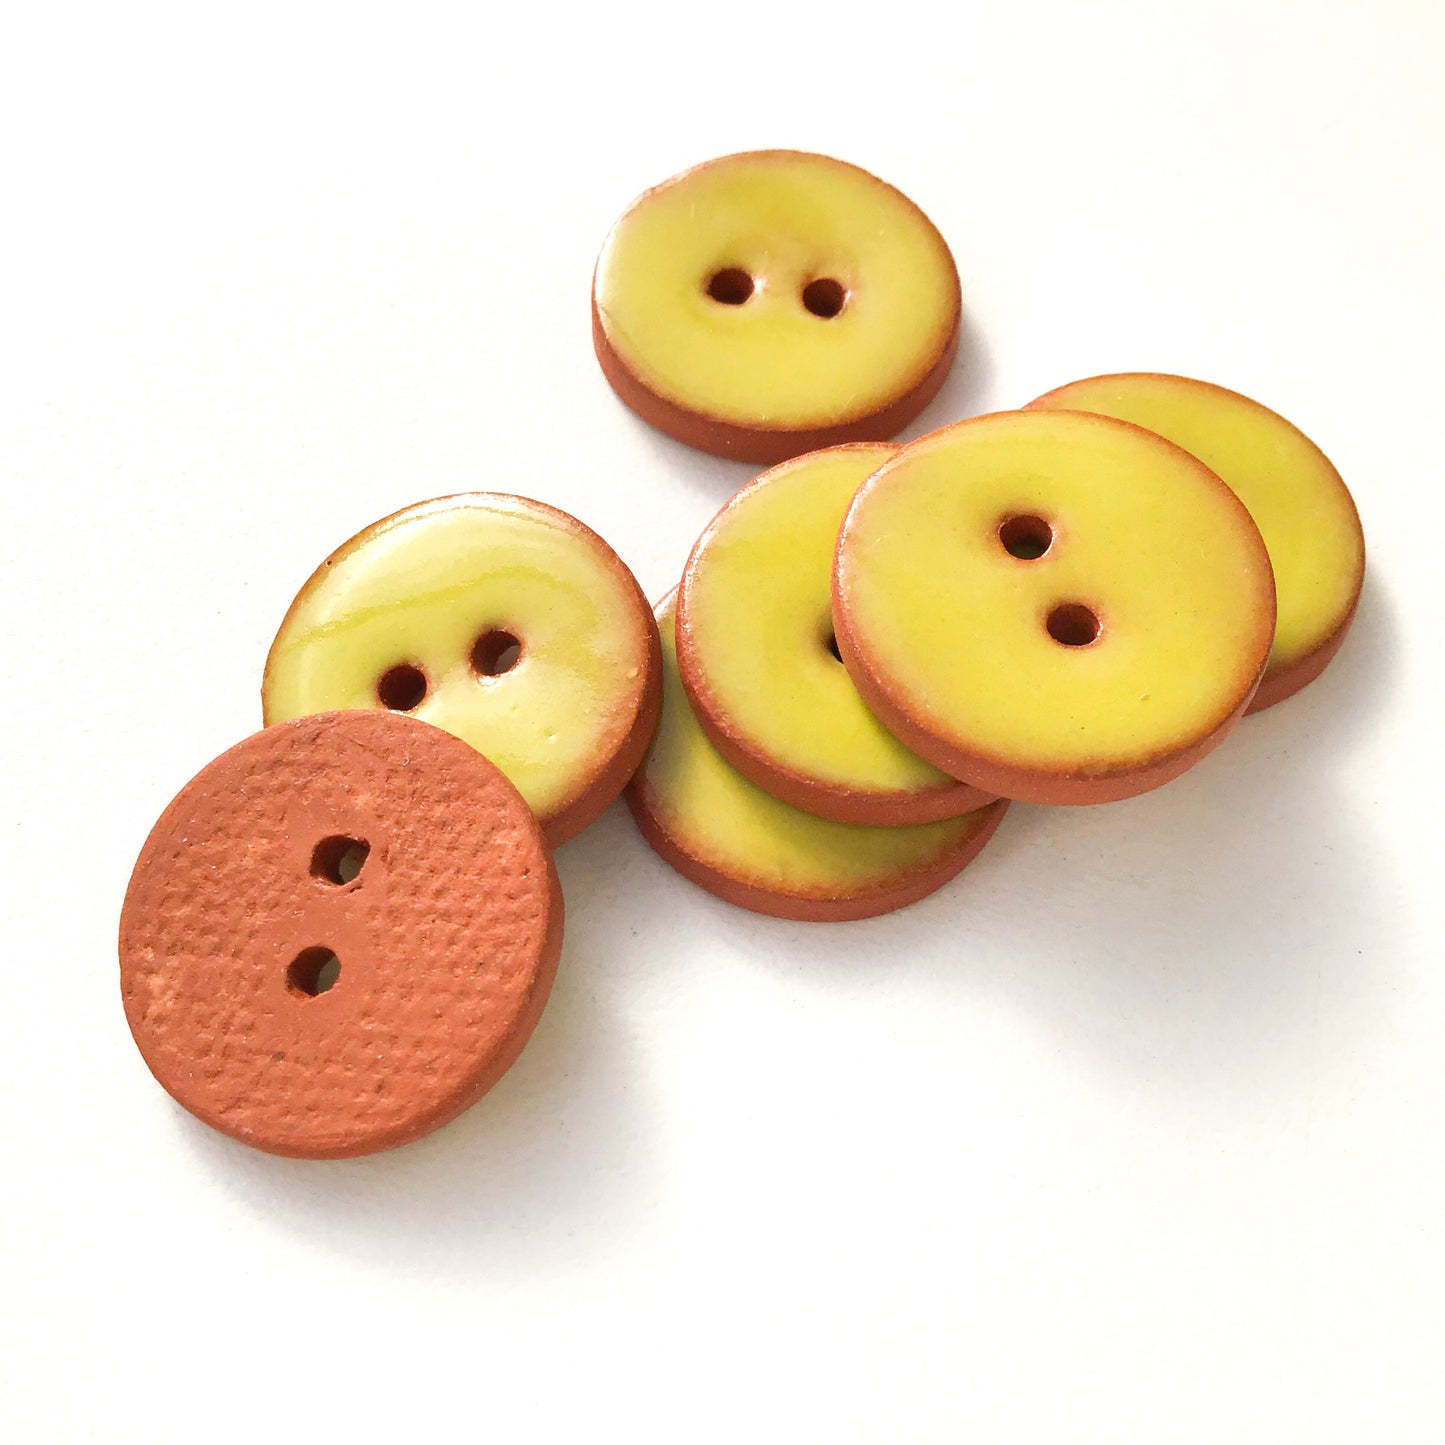 Chartreuse Ceramic Buttons - Clay Buttons - 3/4"- 8 Pack (ws-43)